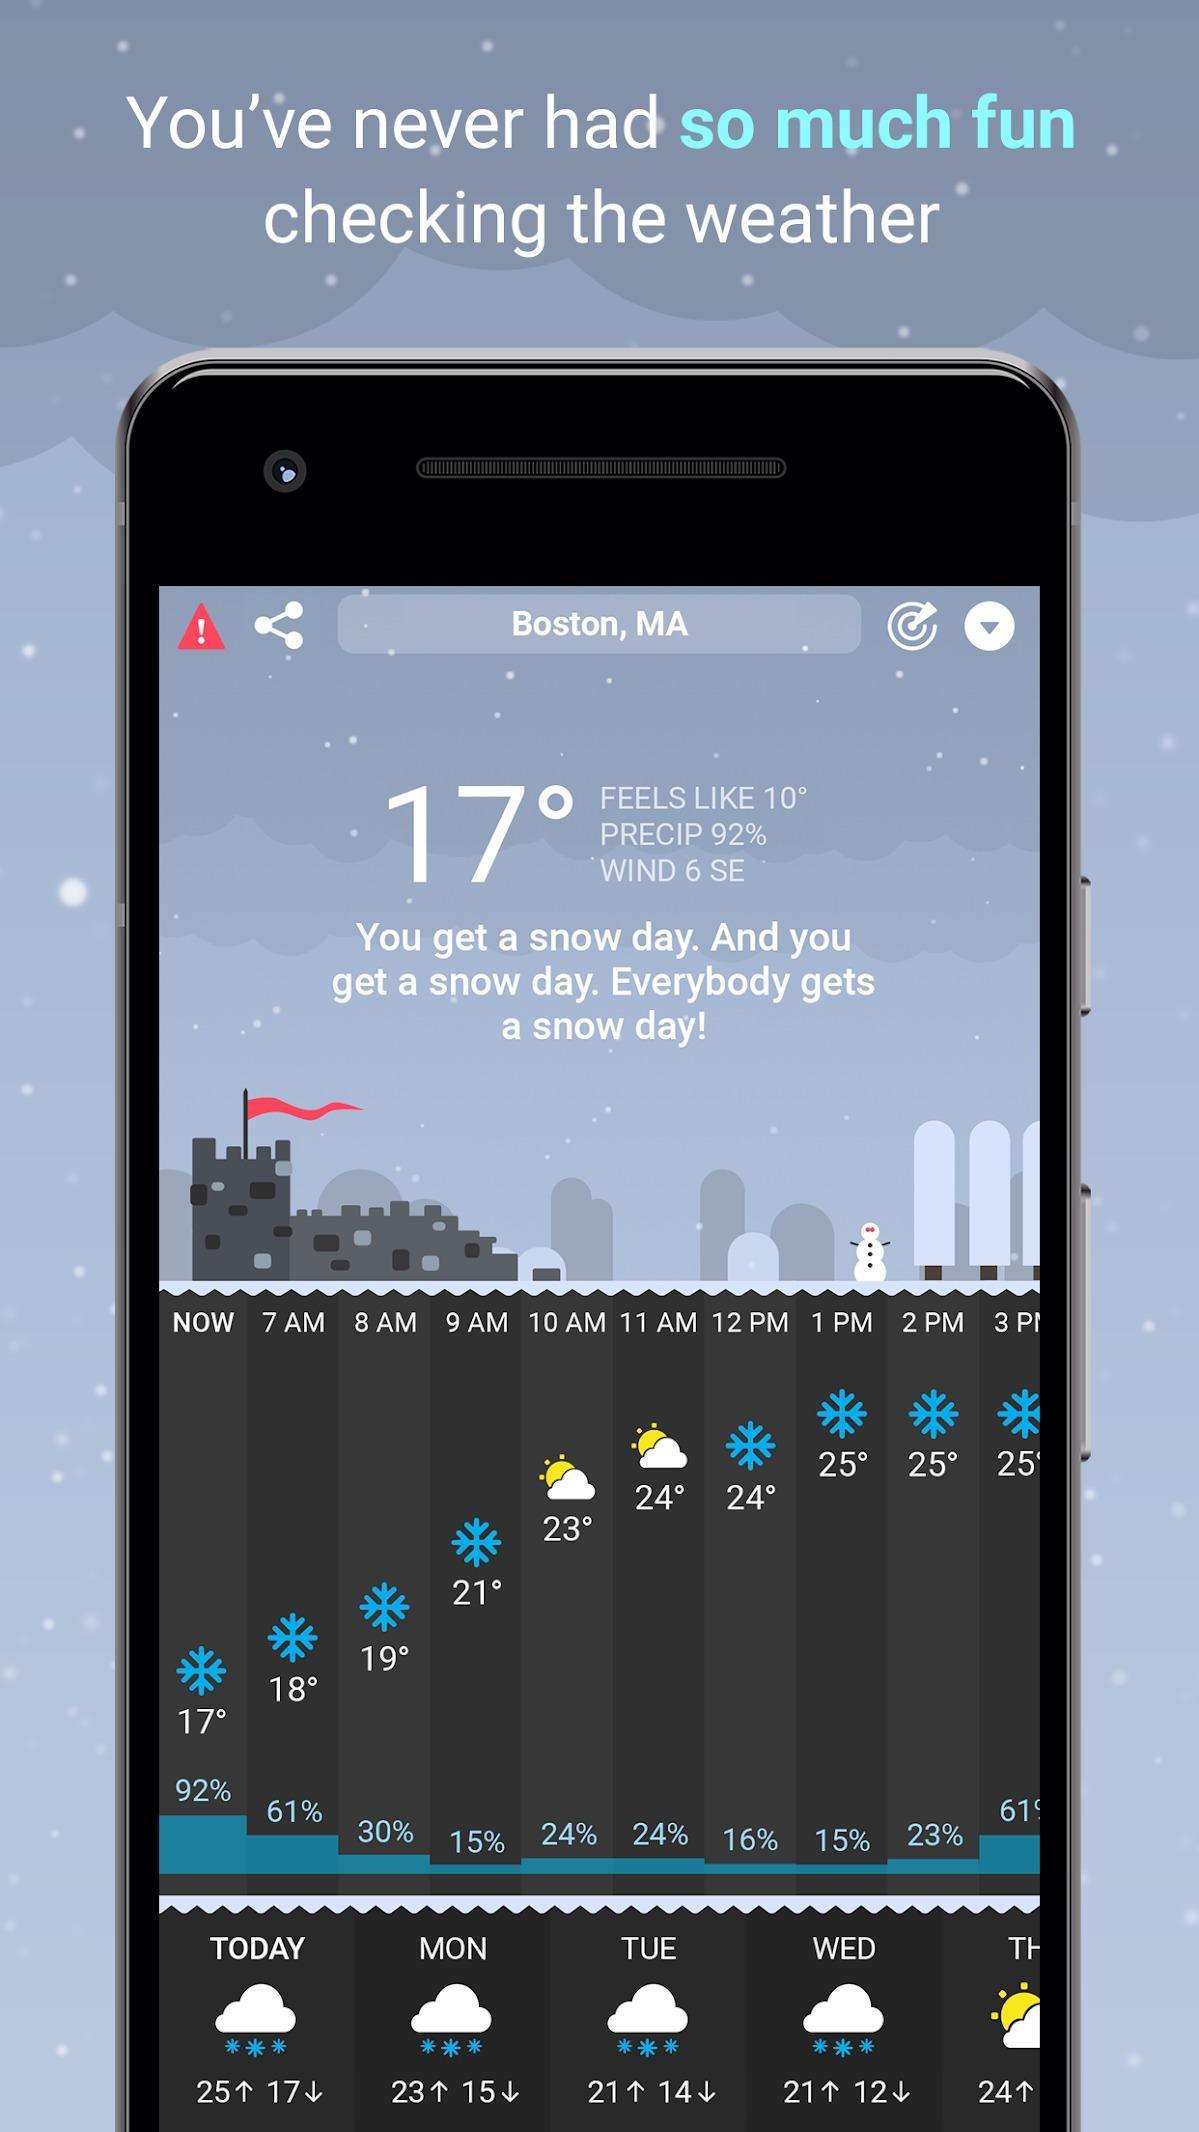 carrot weather ar